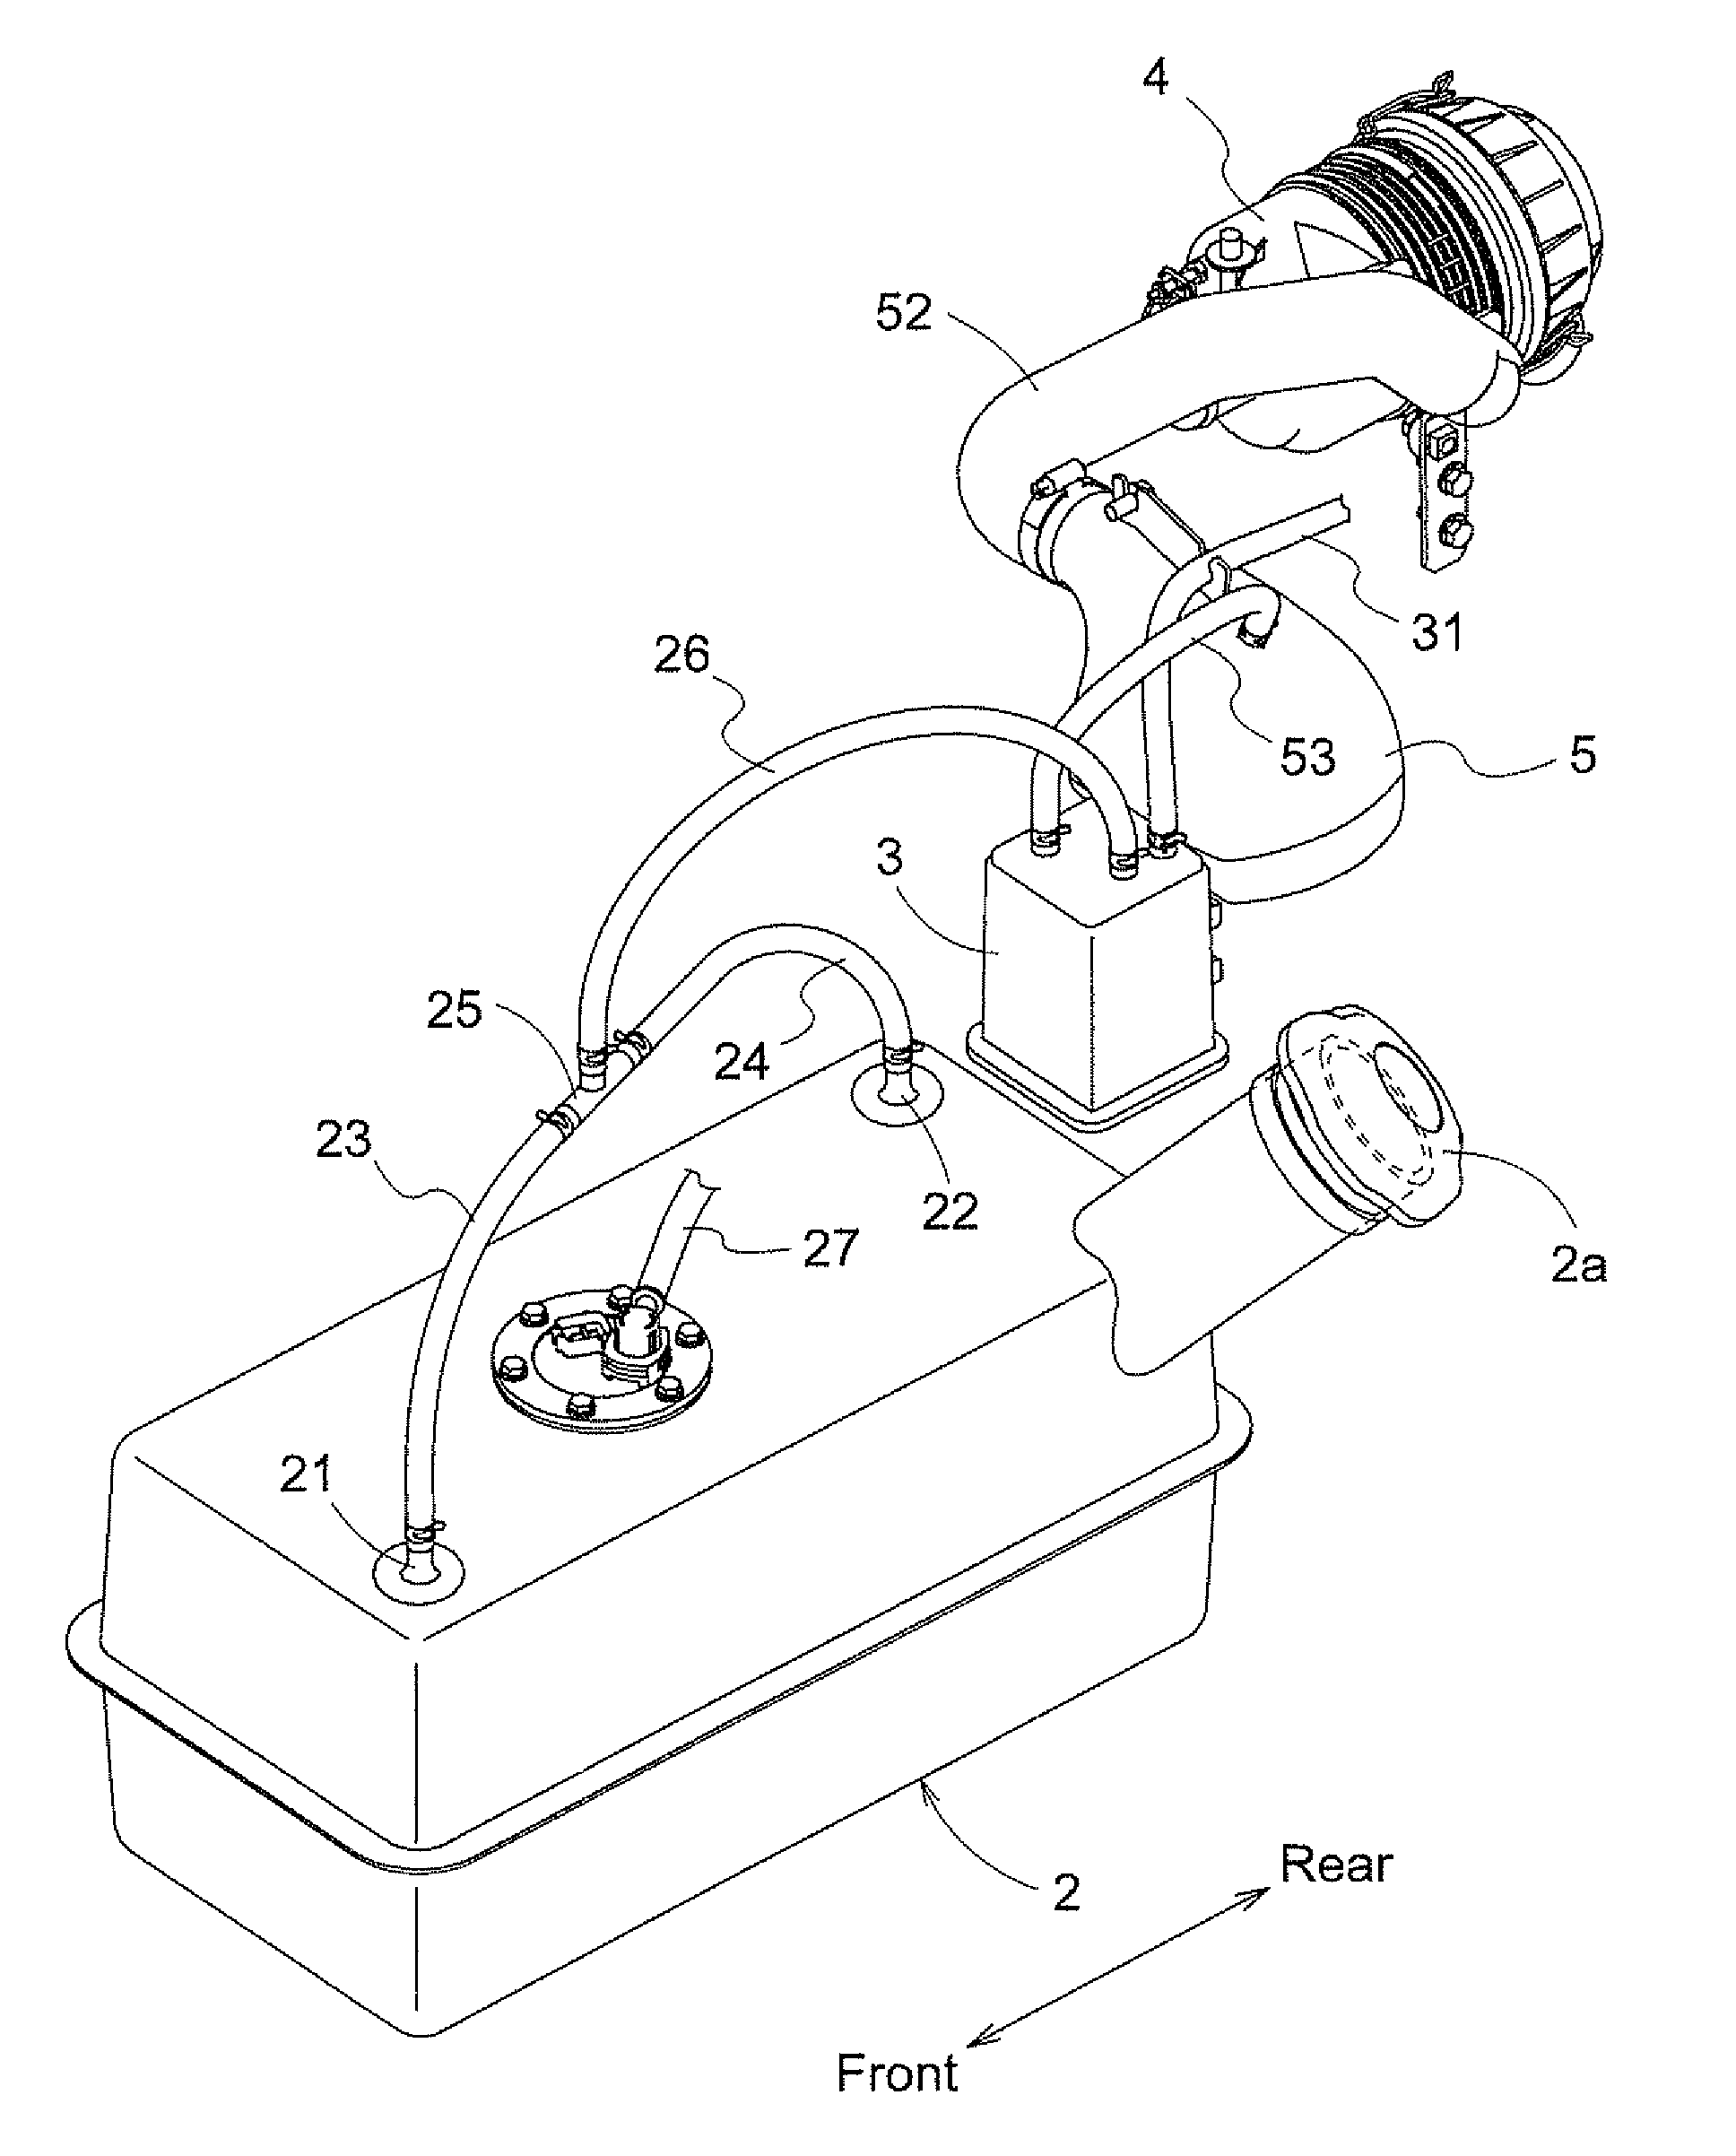 Fuel system for vehicle with engine